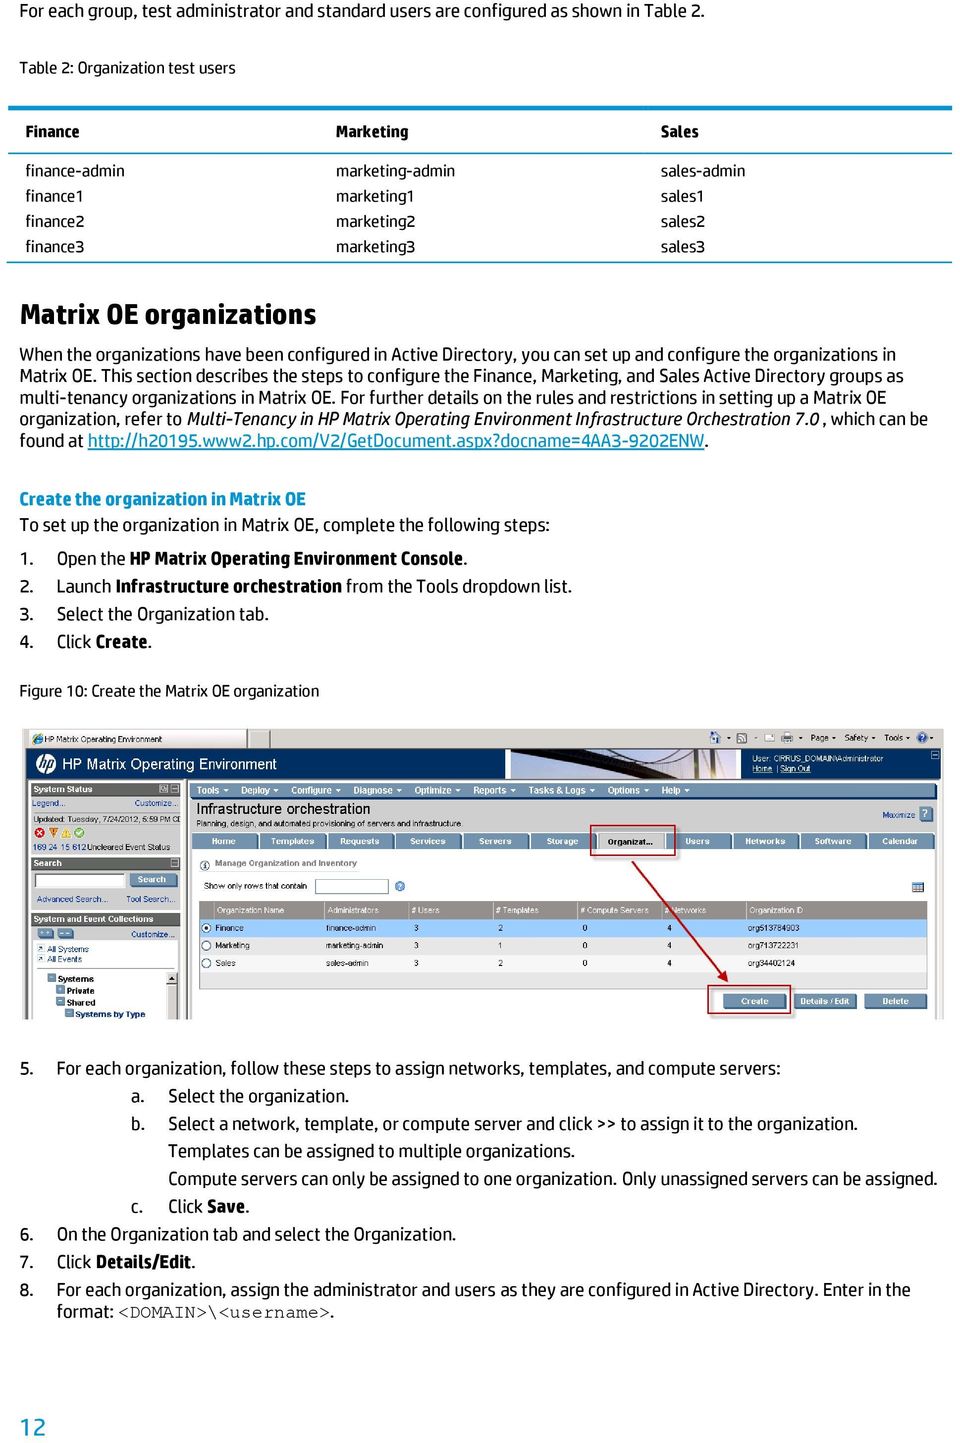 organizations When the organizations have been configured in Active Directory, you can set up and configure the organizations in Matrix OE.